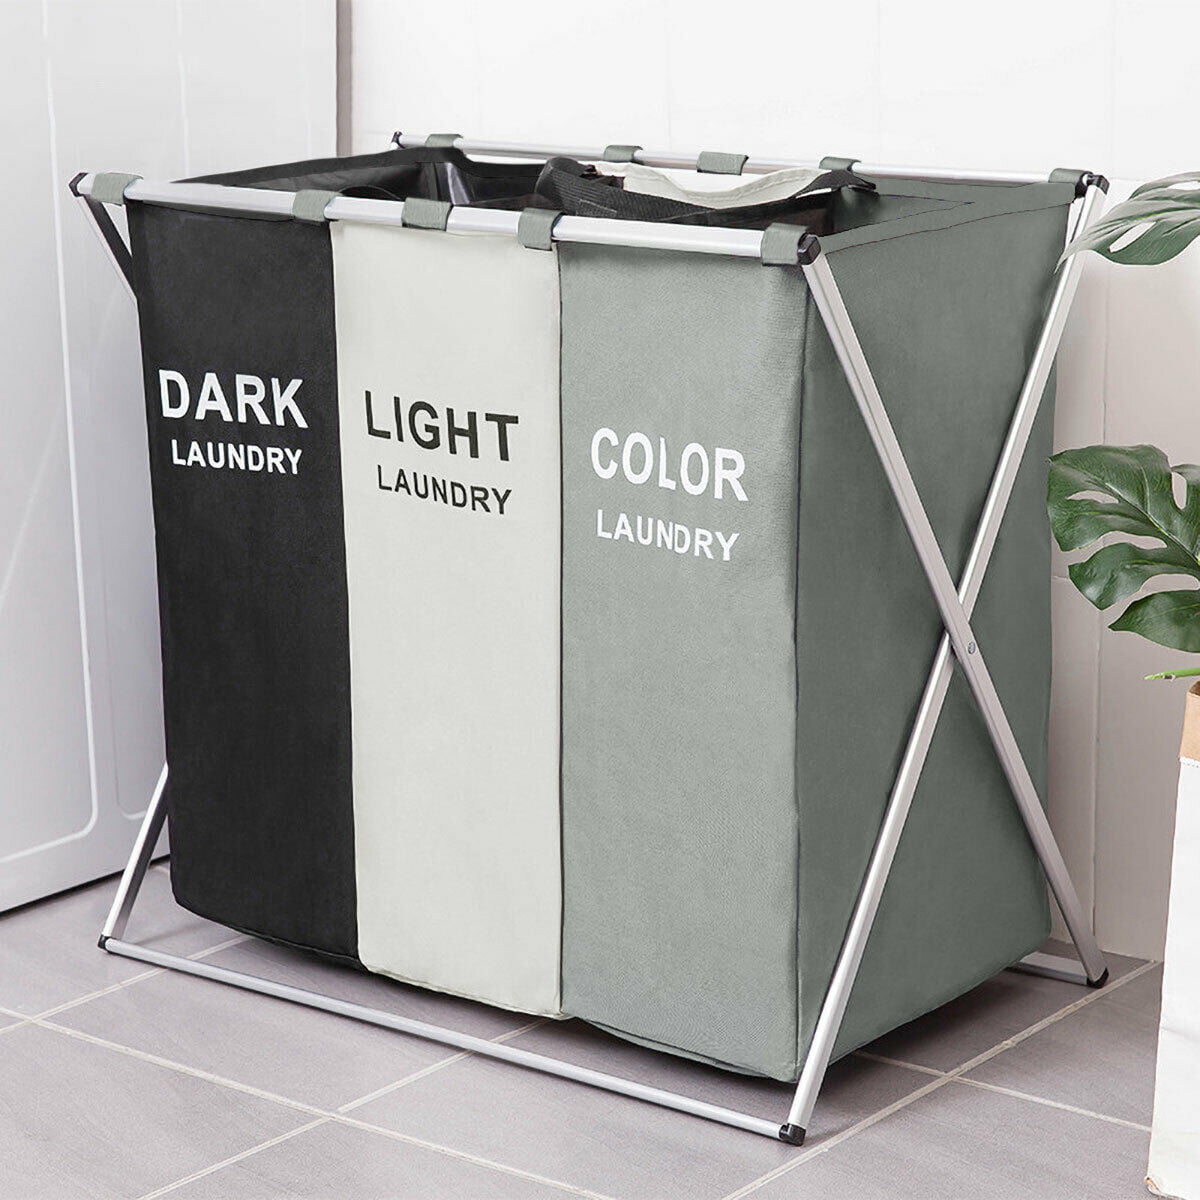 Foldable Clothes Laundry Basket 3 Section Hamper Bag Large Cart with Wheels USA 